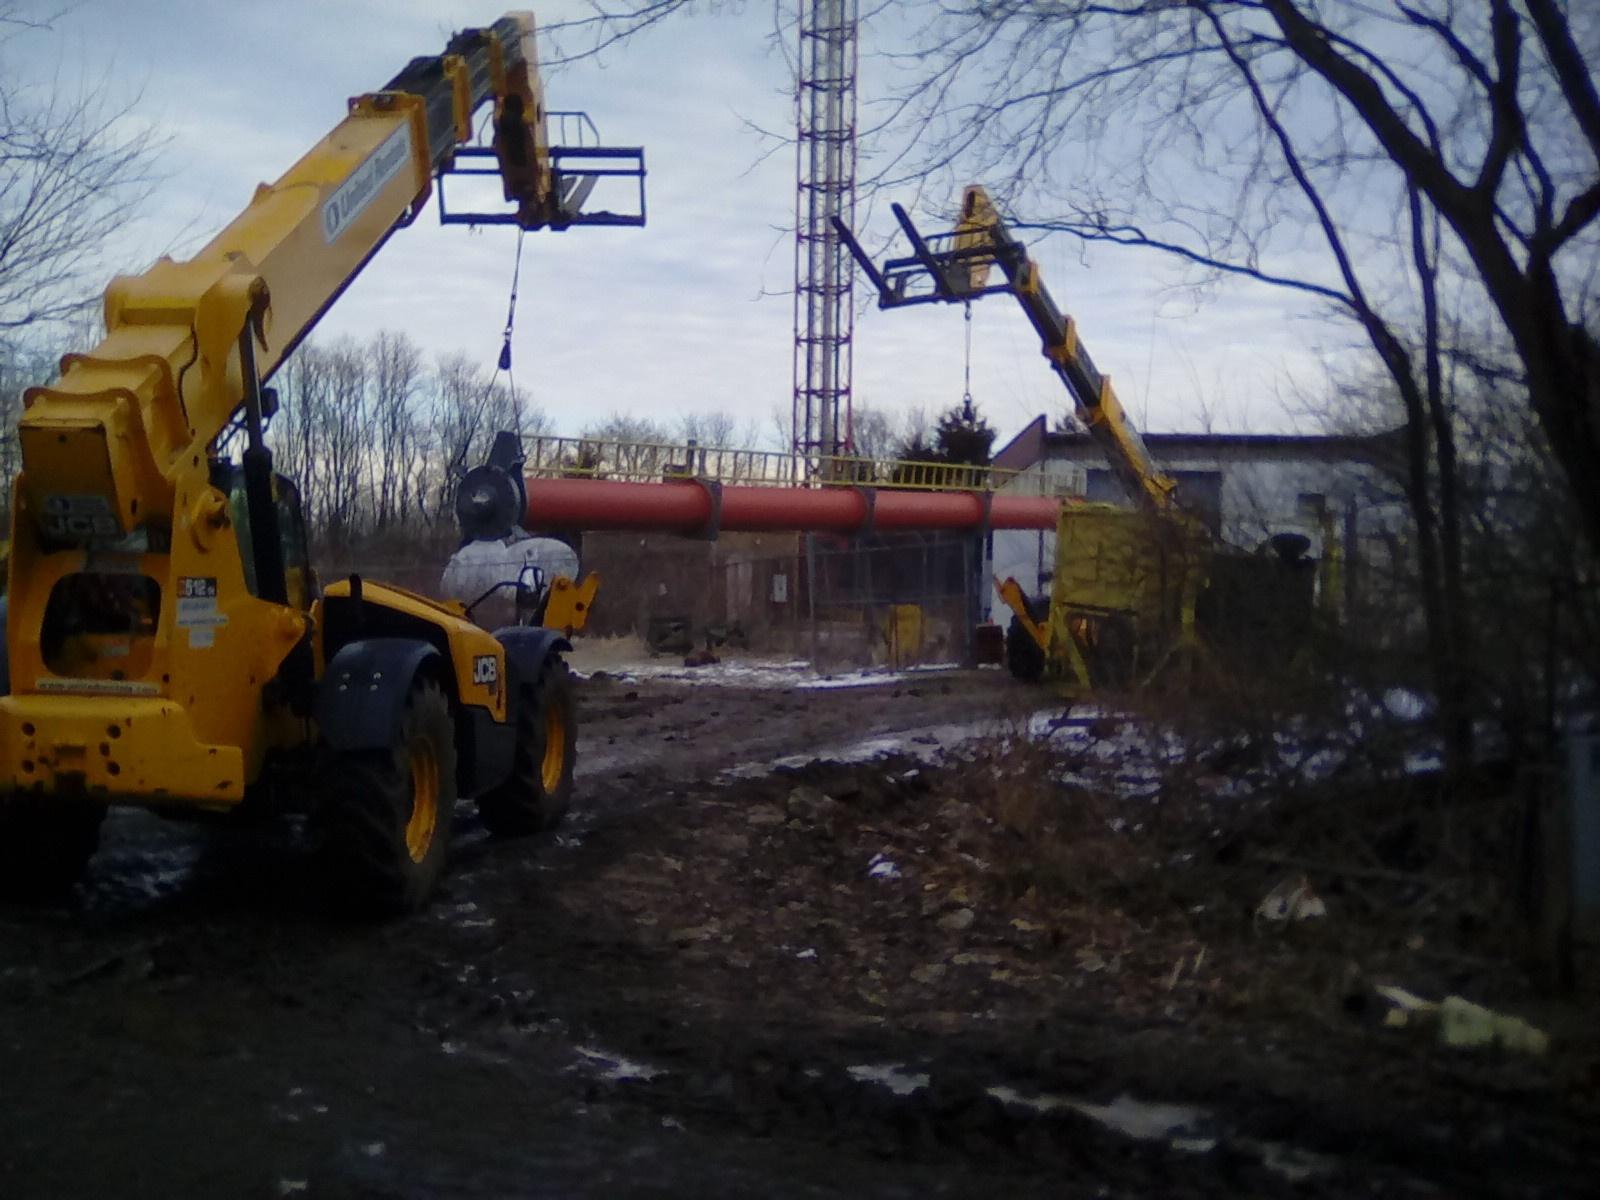 Antenna being moved to the site